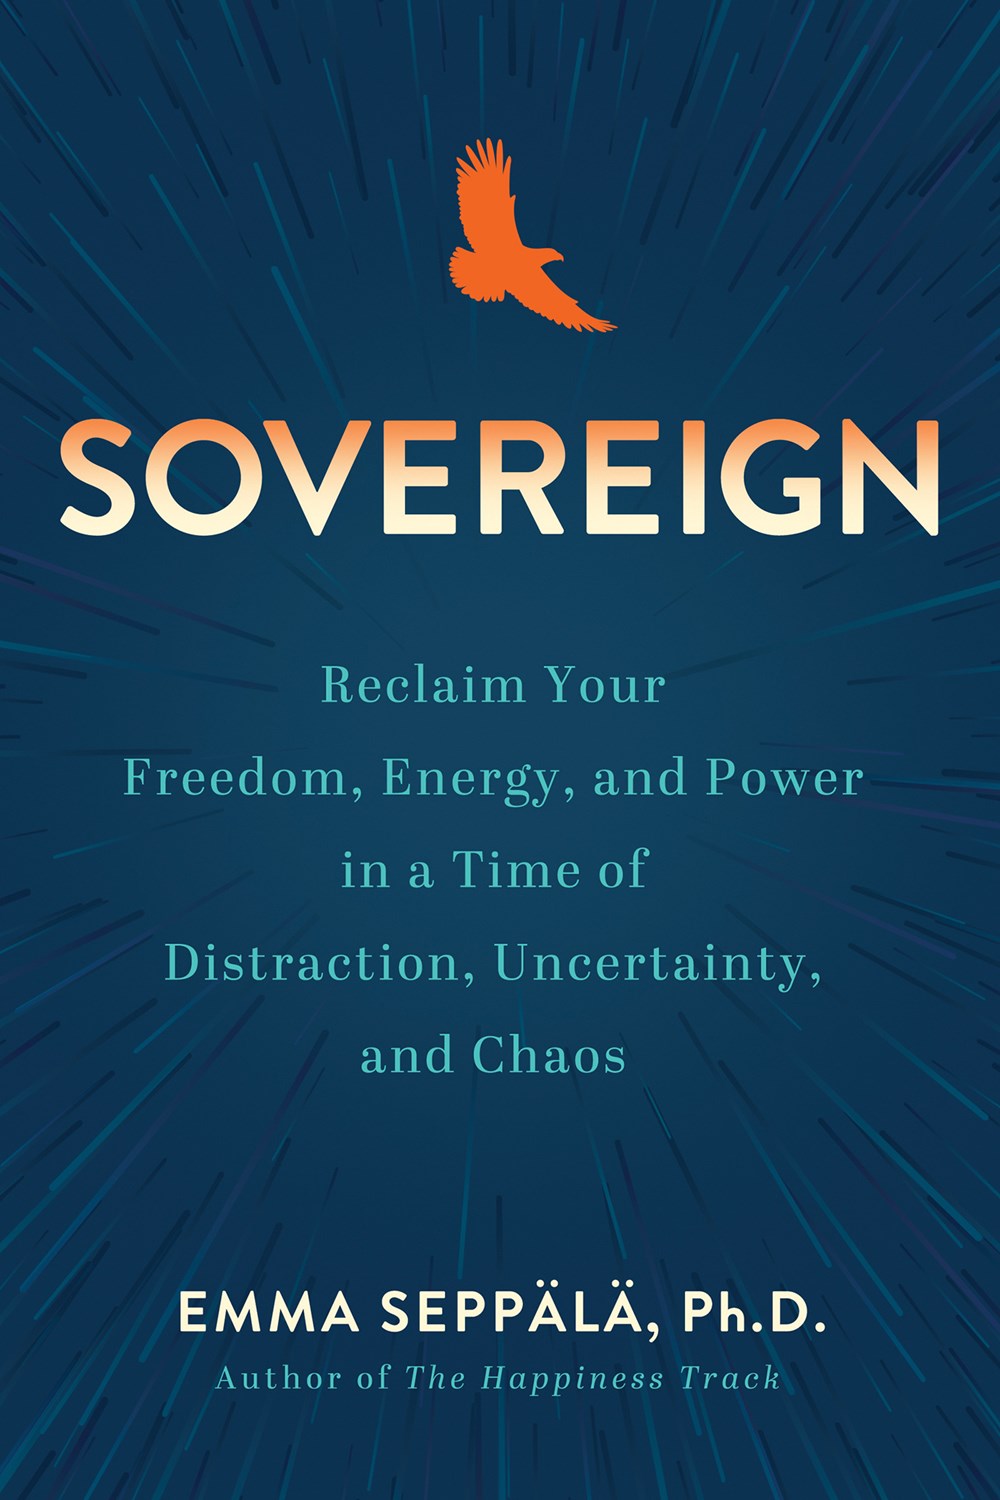 Sovereign: Reclaim Your Freedom, Energy, and Power in a Time of Distraction, Uncertainty, and Chaos by Emma Seppala (4/23/24)